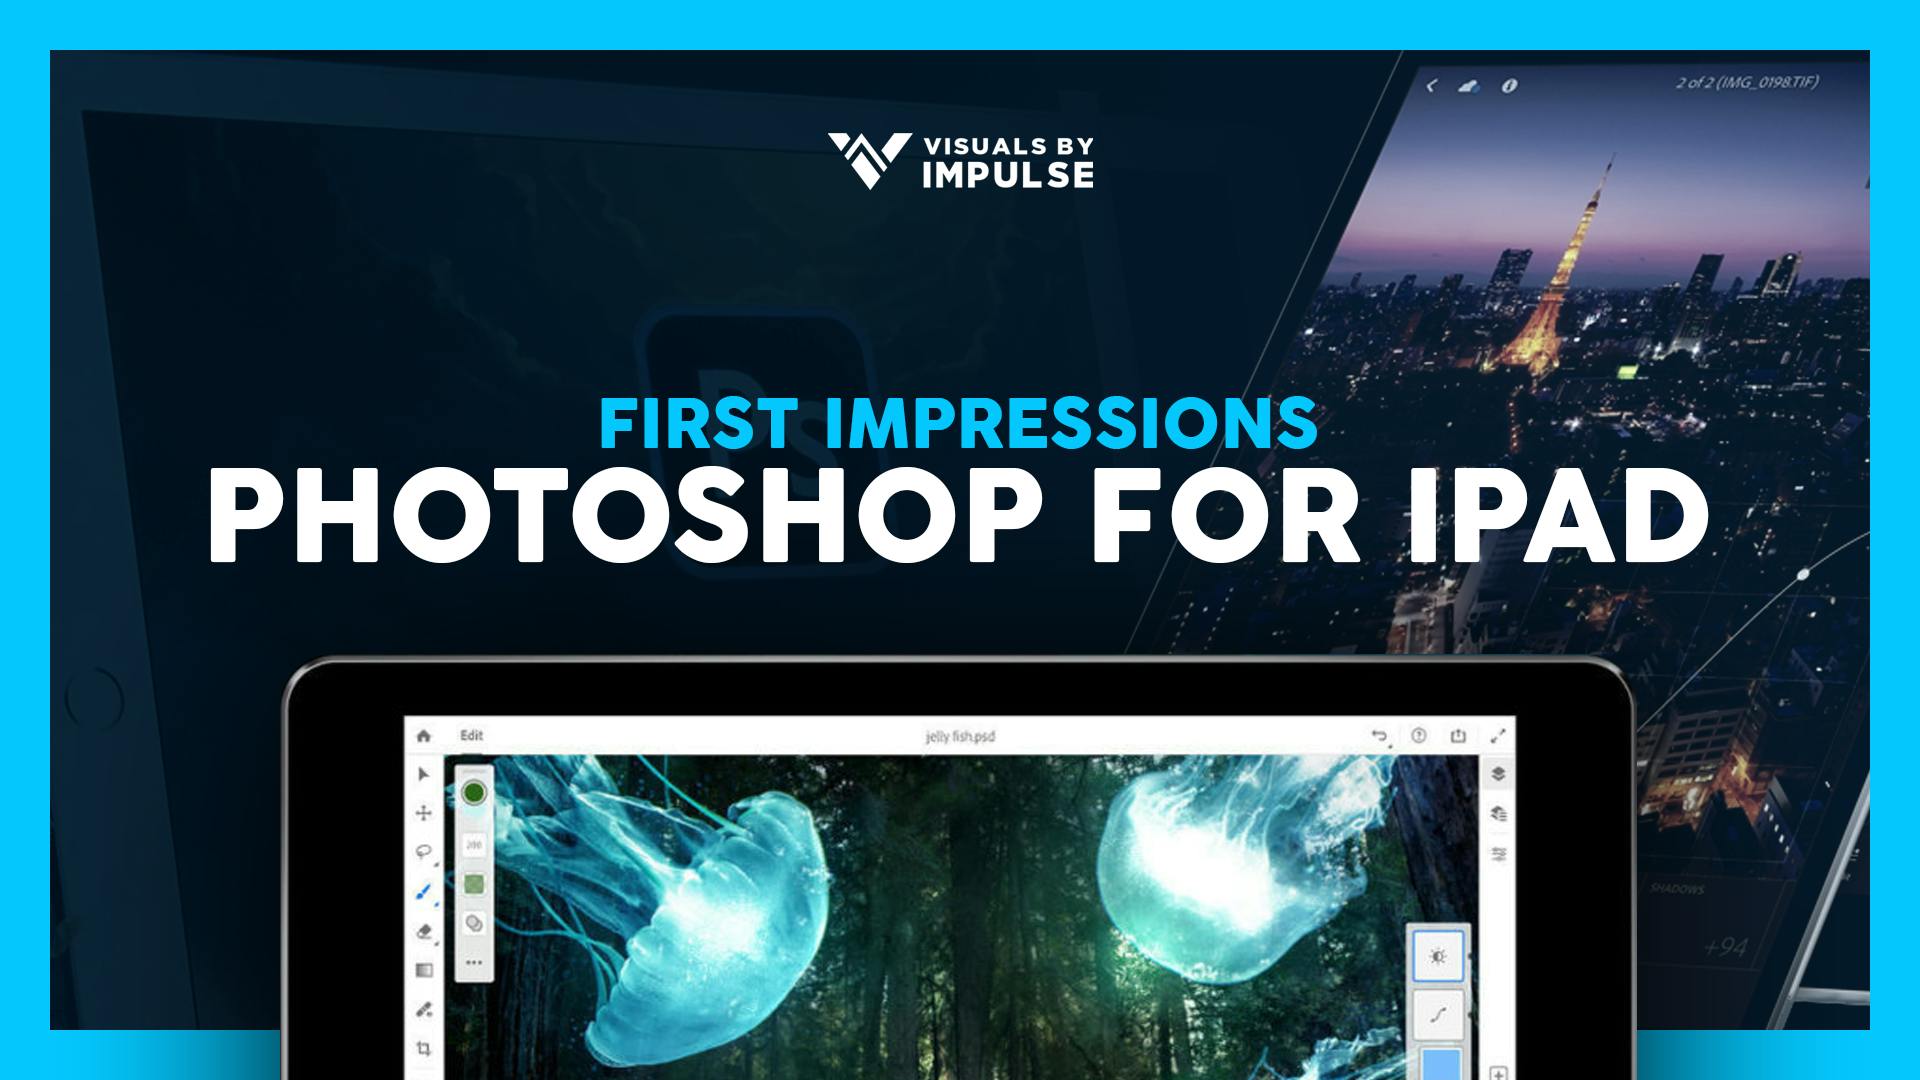 Photoshop for iPad Our First Impressions